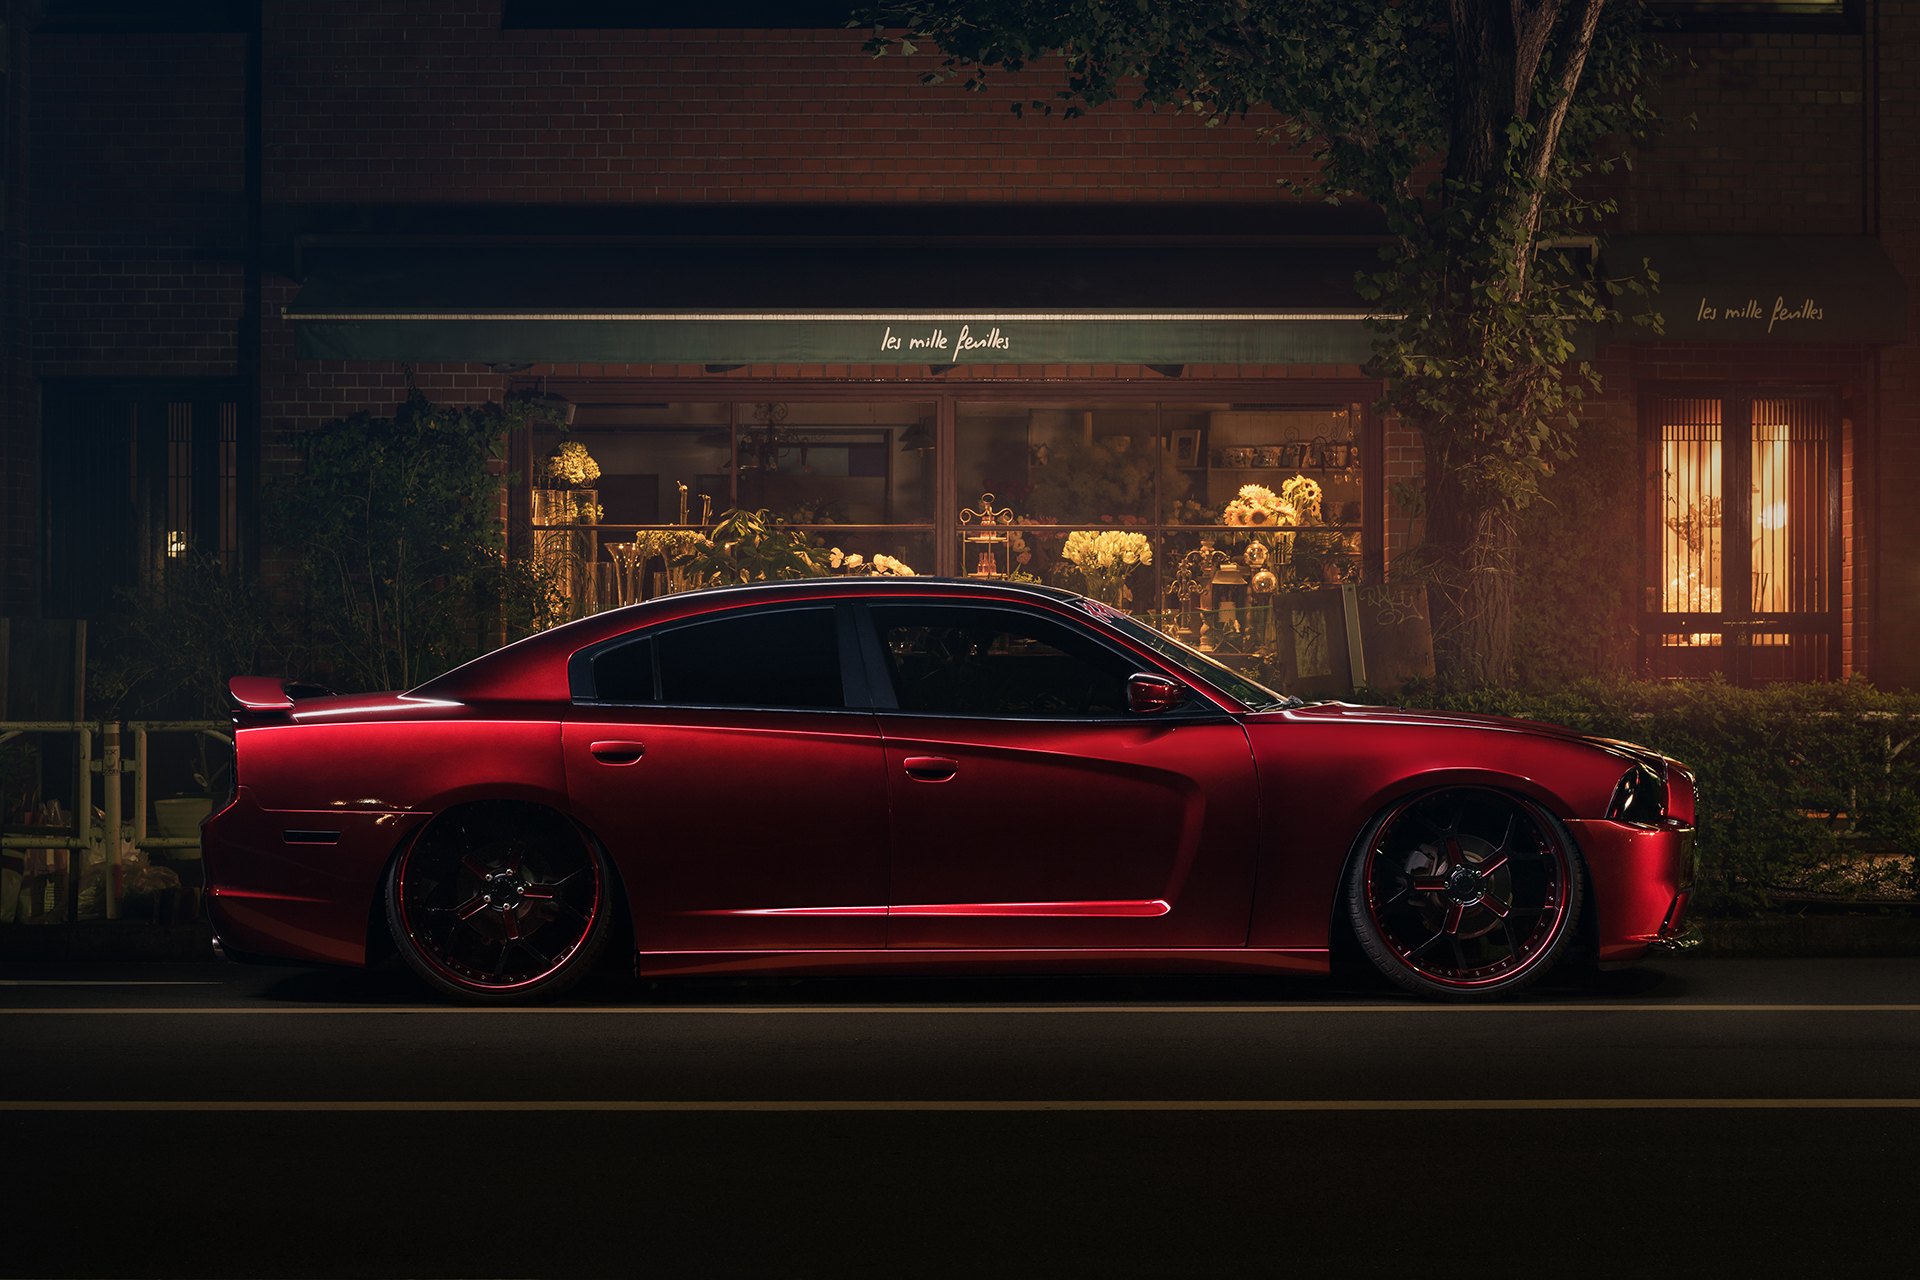 Aftermarket Side Skirts on Red Dodge Charger - Photo by Forgiato